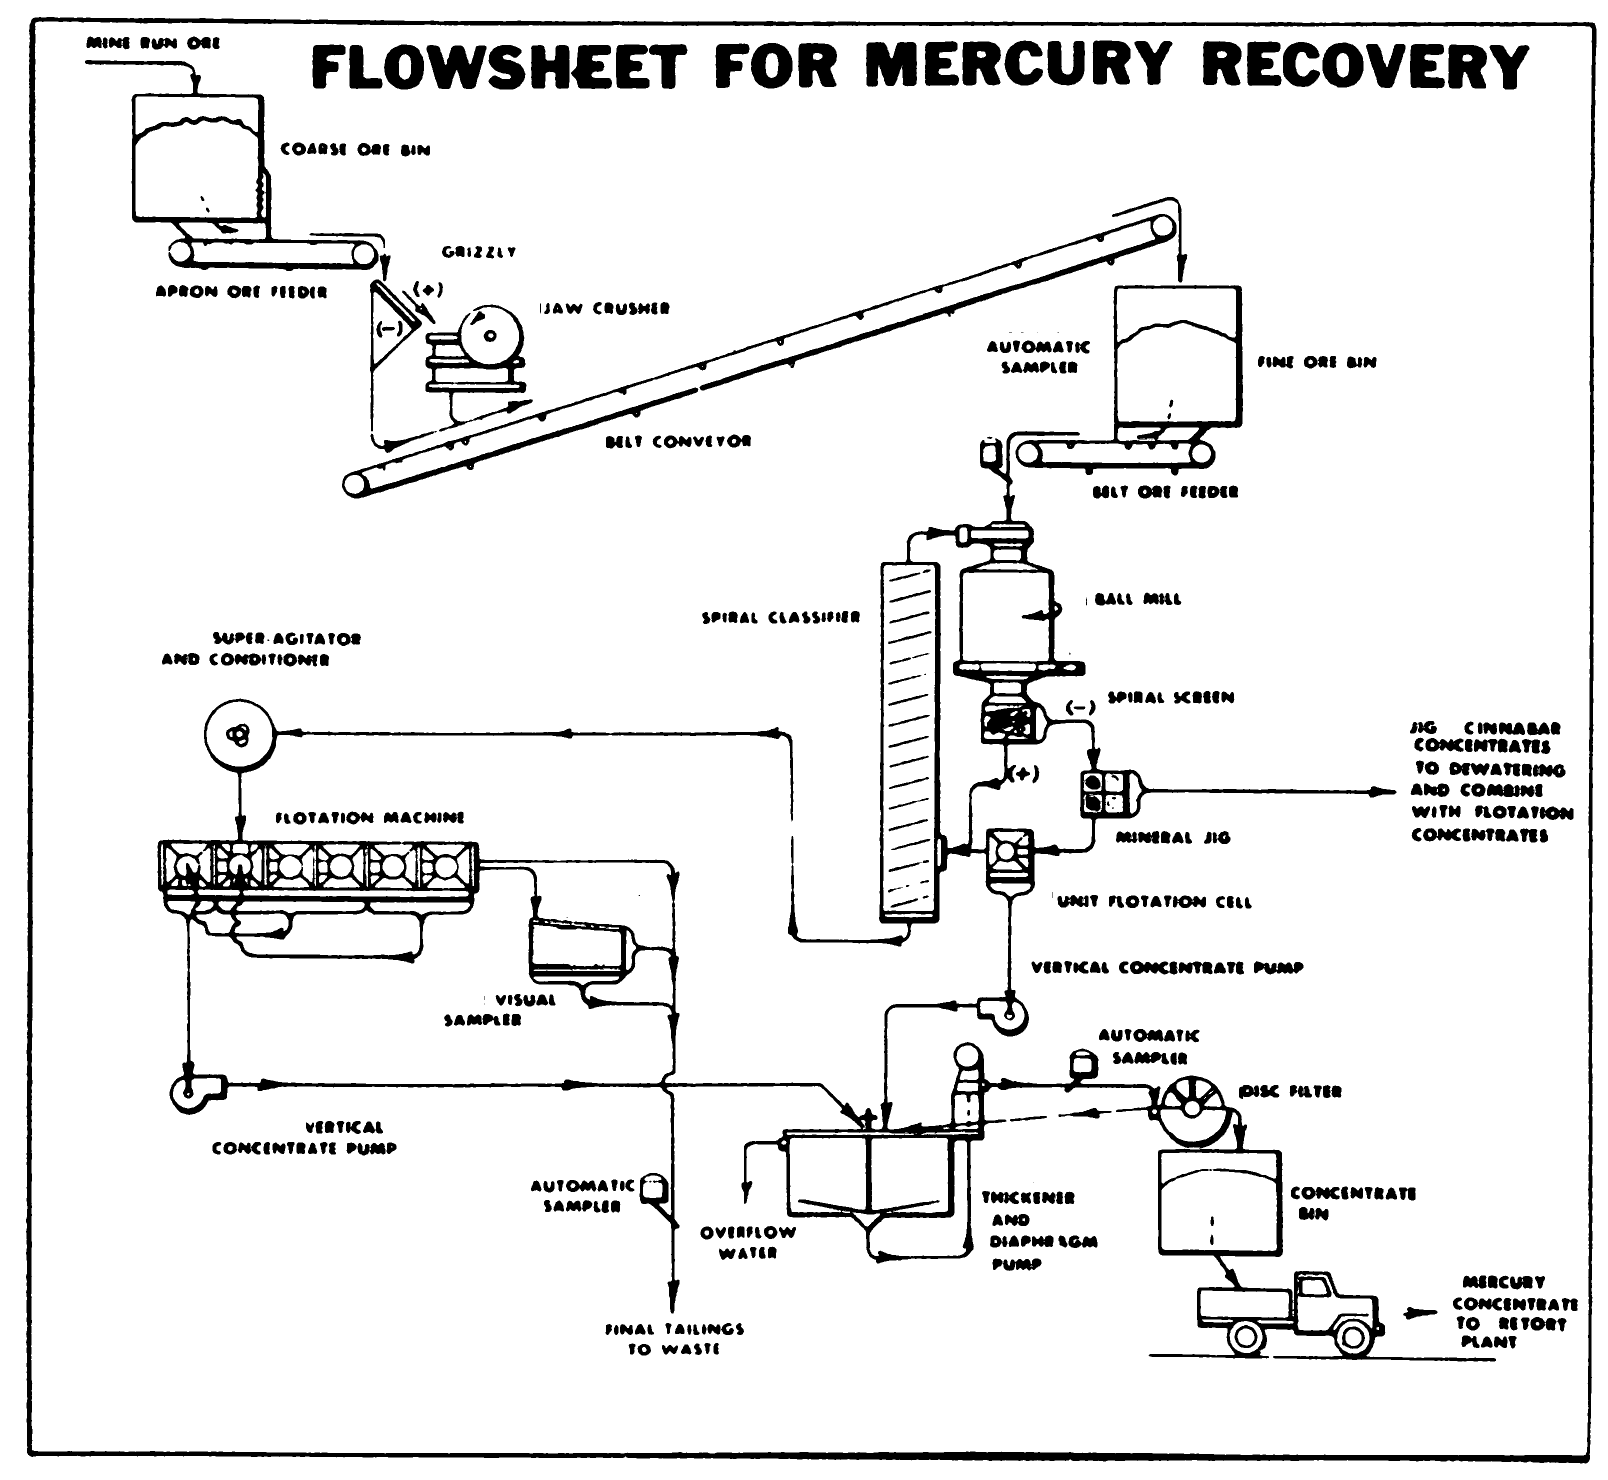 How is Mercury Extracted from Cinnabar Ore